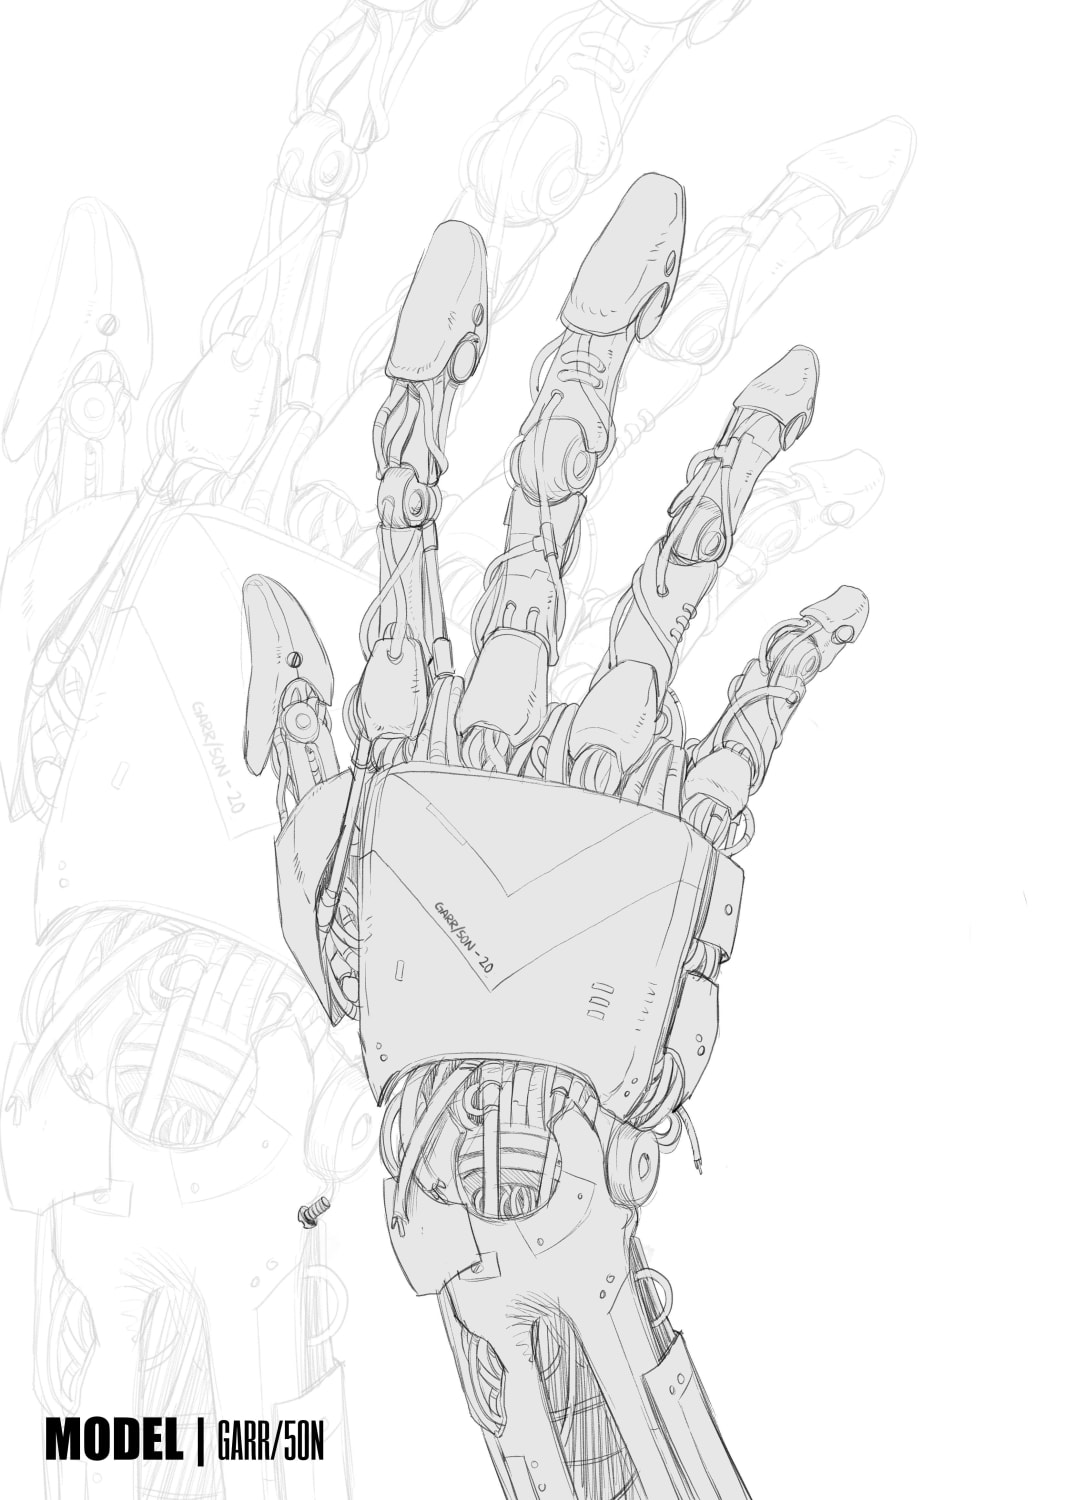 Went out of my comfort zone and drew a robot hand.